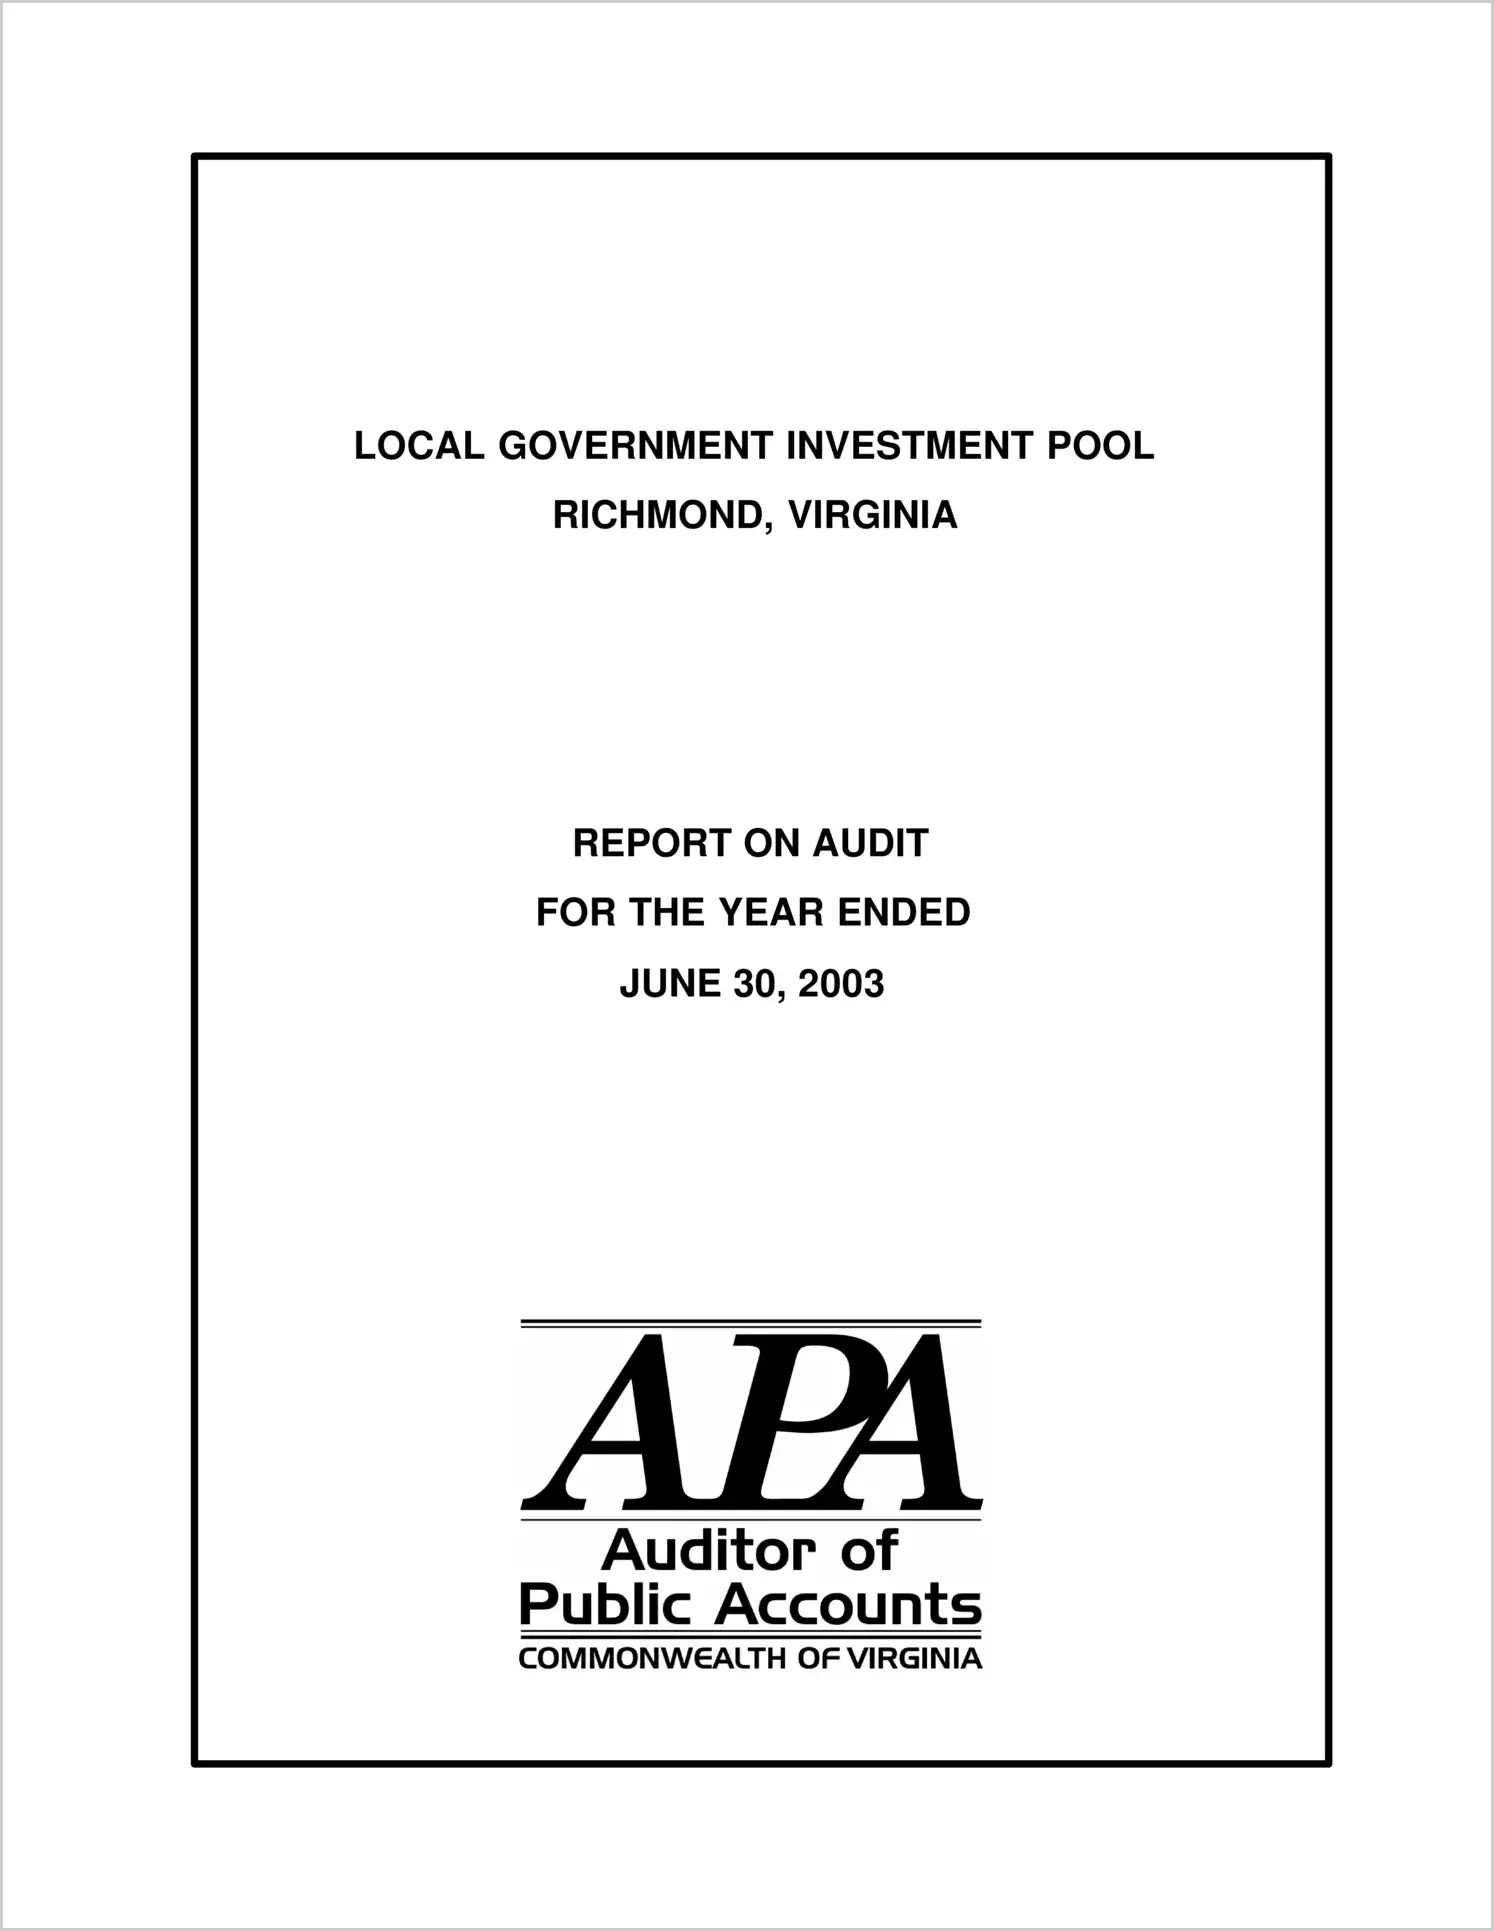 Local Government Investment Pool for the year ended June 30, 2003